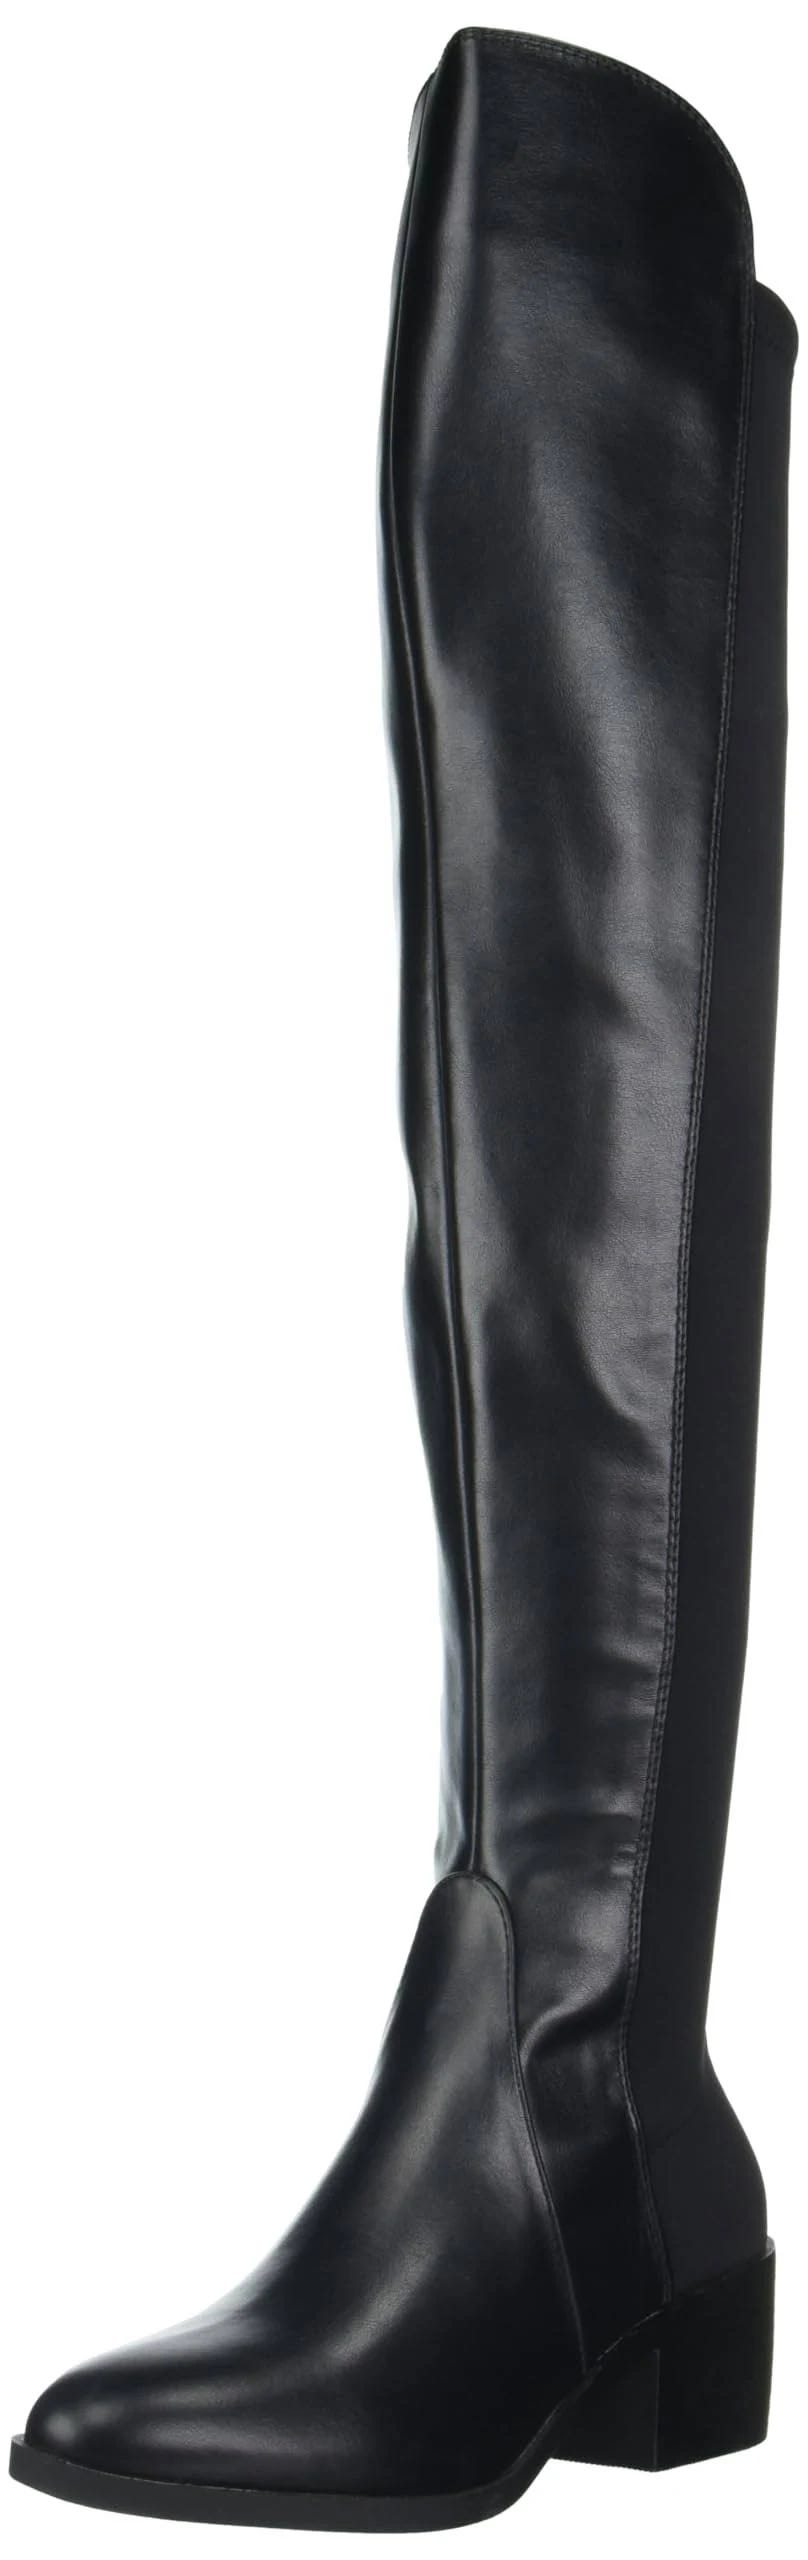 Black Stretchy Over the Knee Boots for Snug Fit and Style | Image